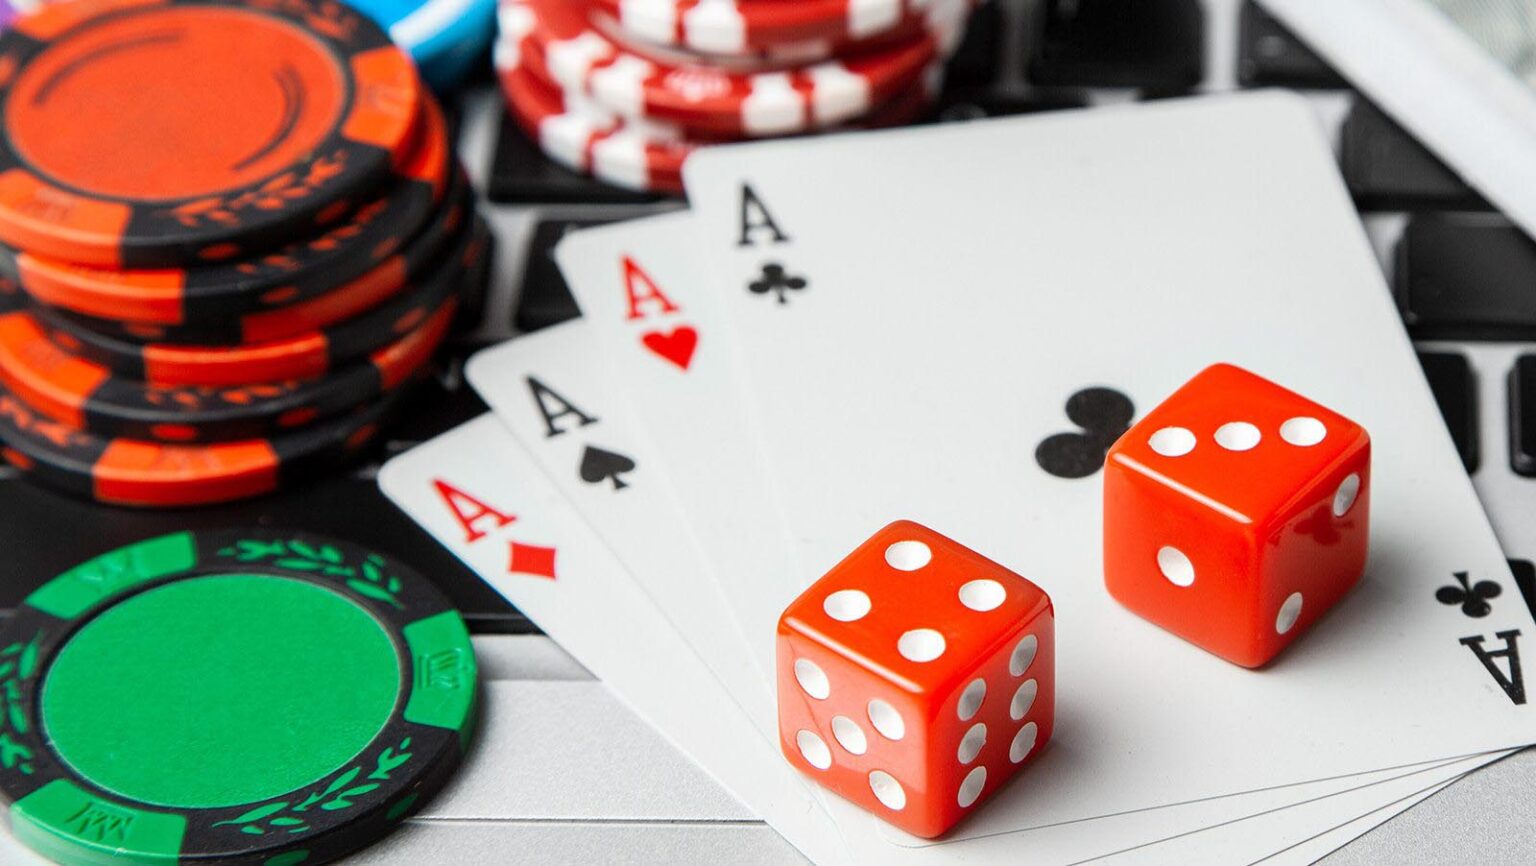 The right legitimate online casino is crucial when you want to gamble. Here are some tips on how to choose one today.